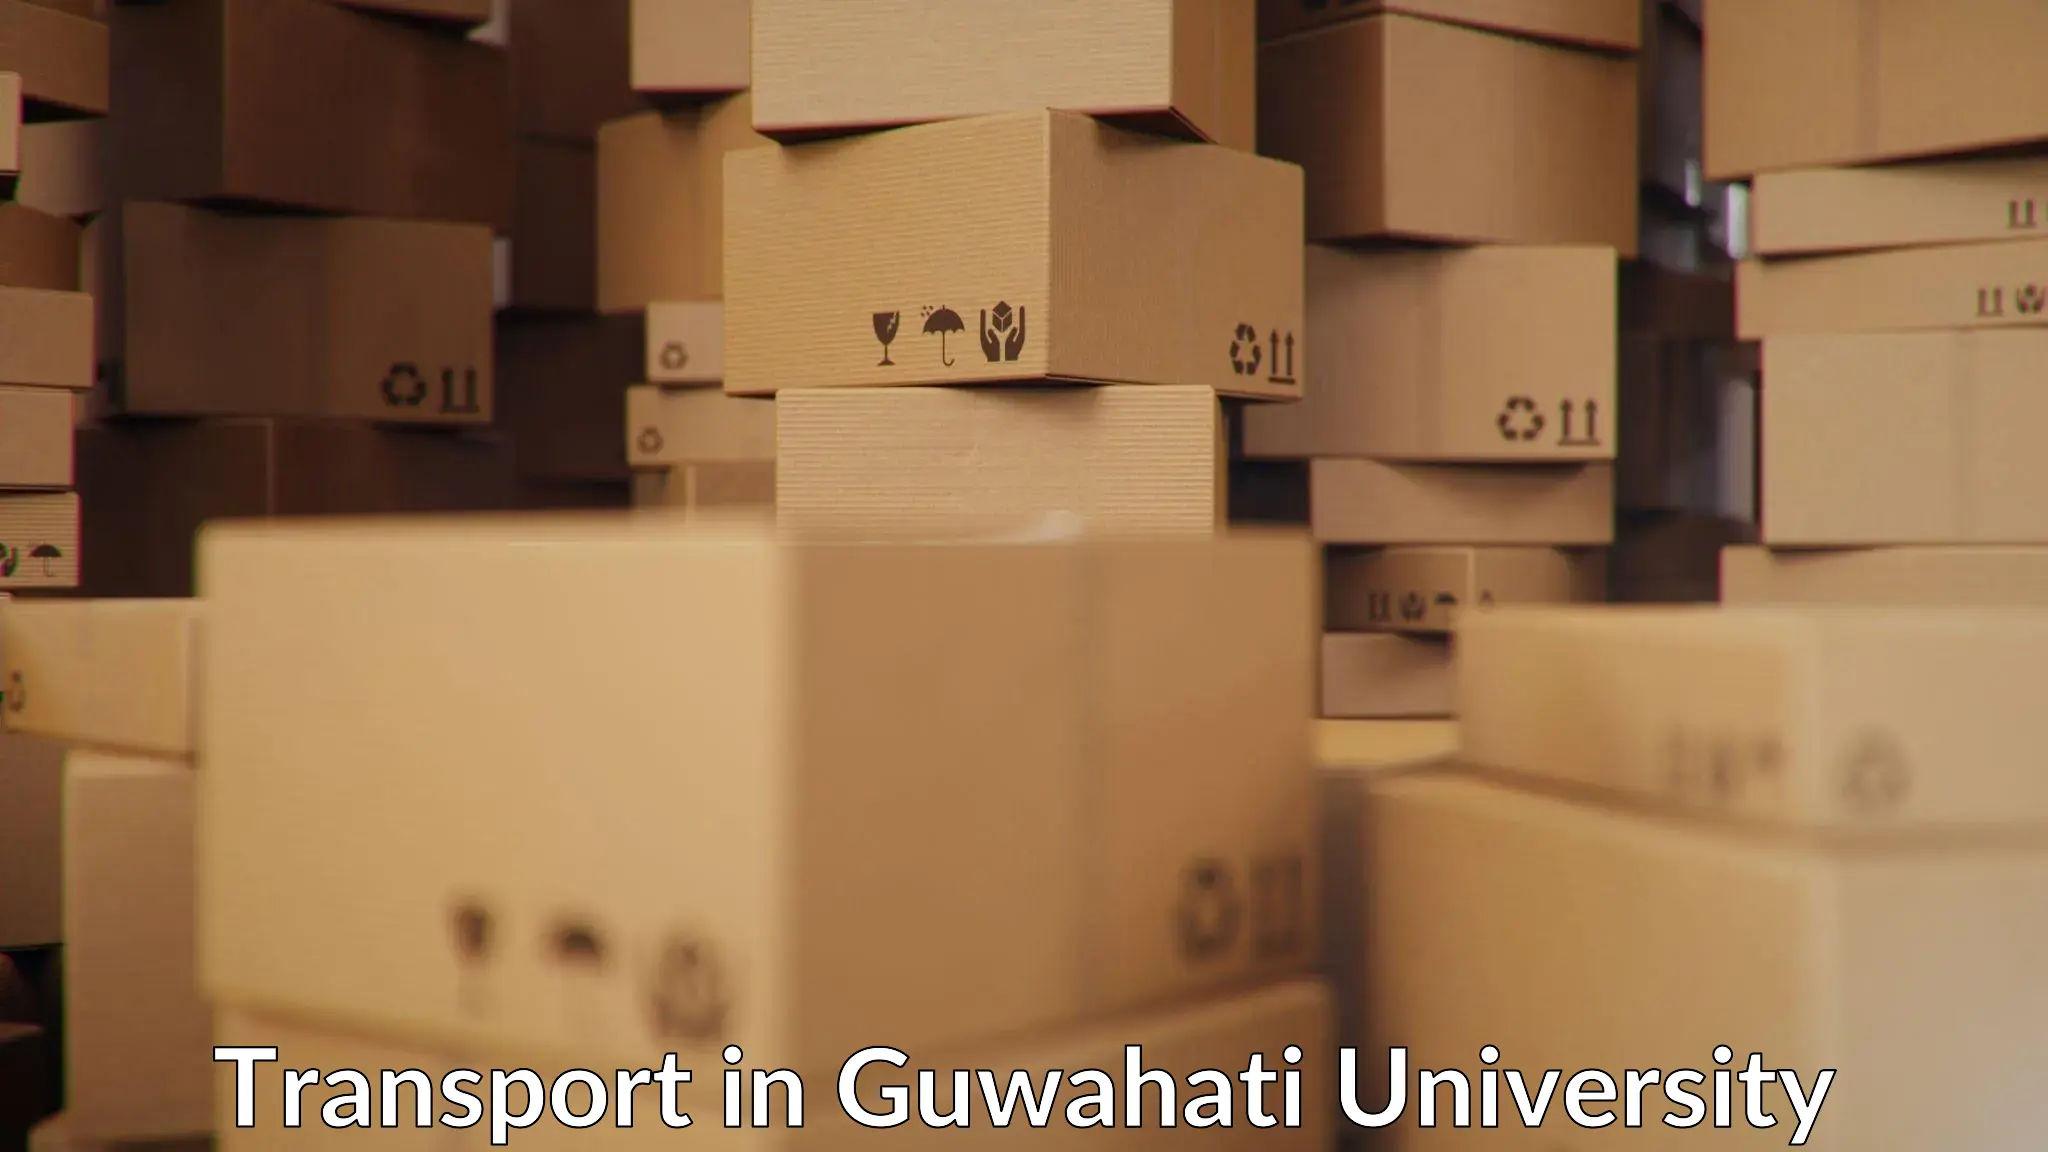 Road transport online services in Guwahati University